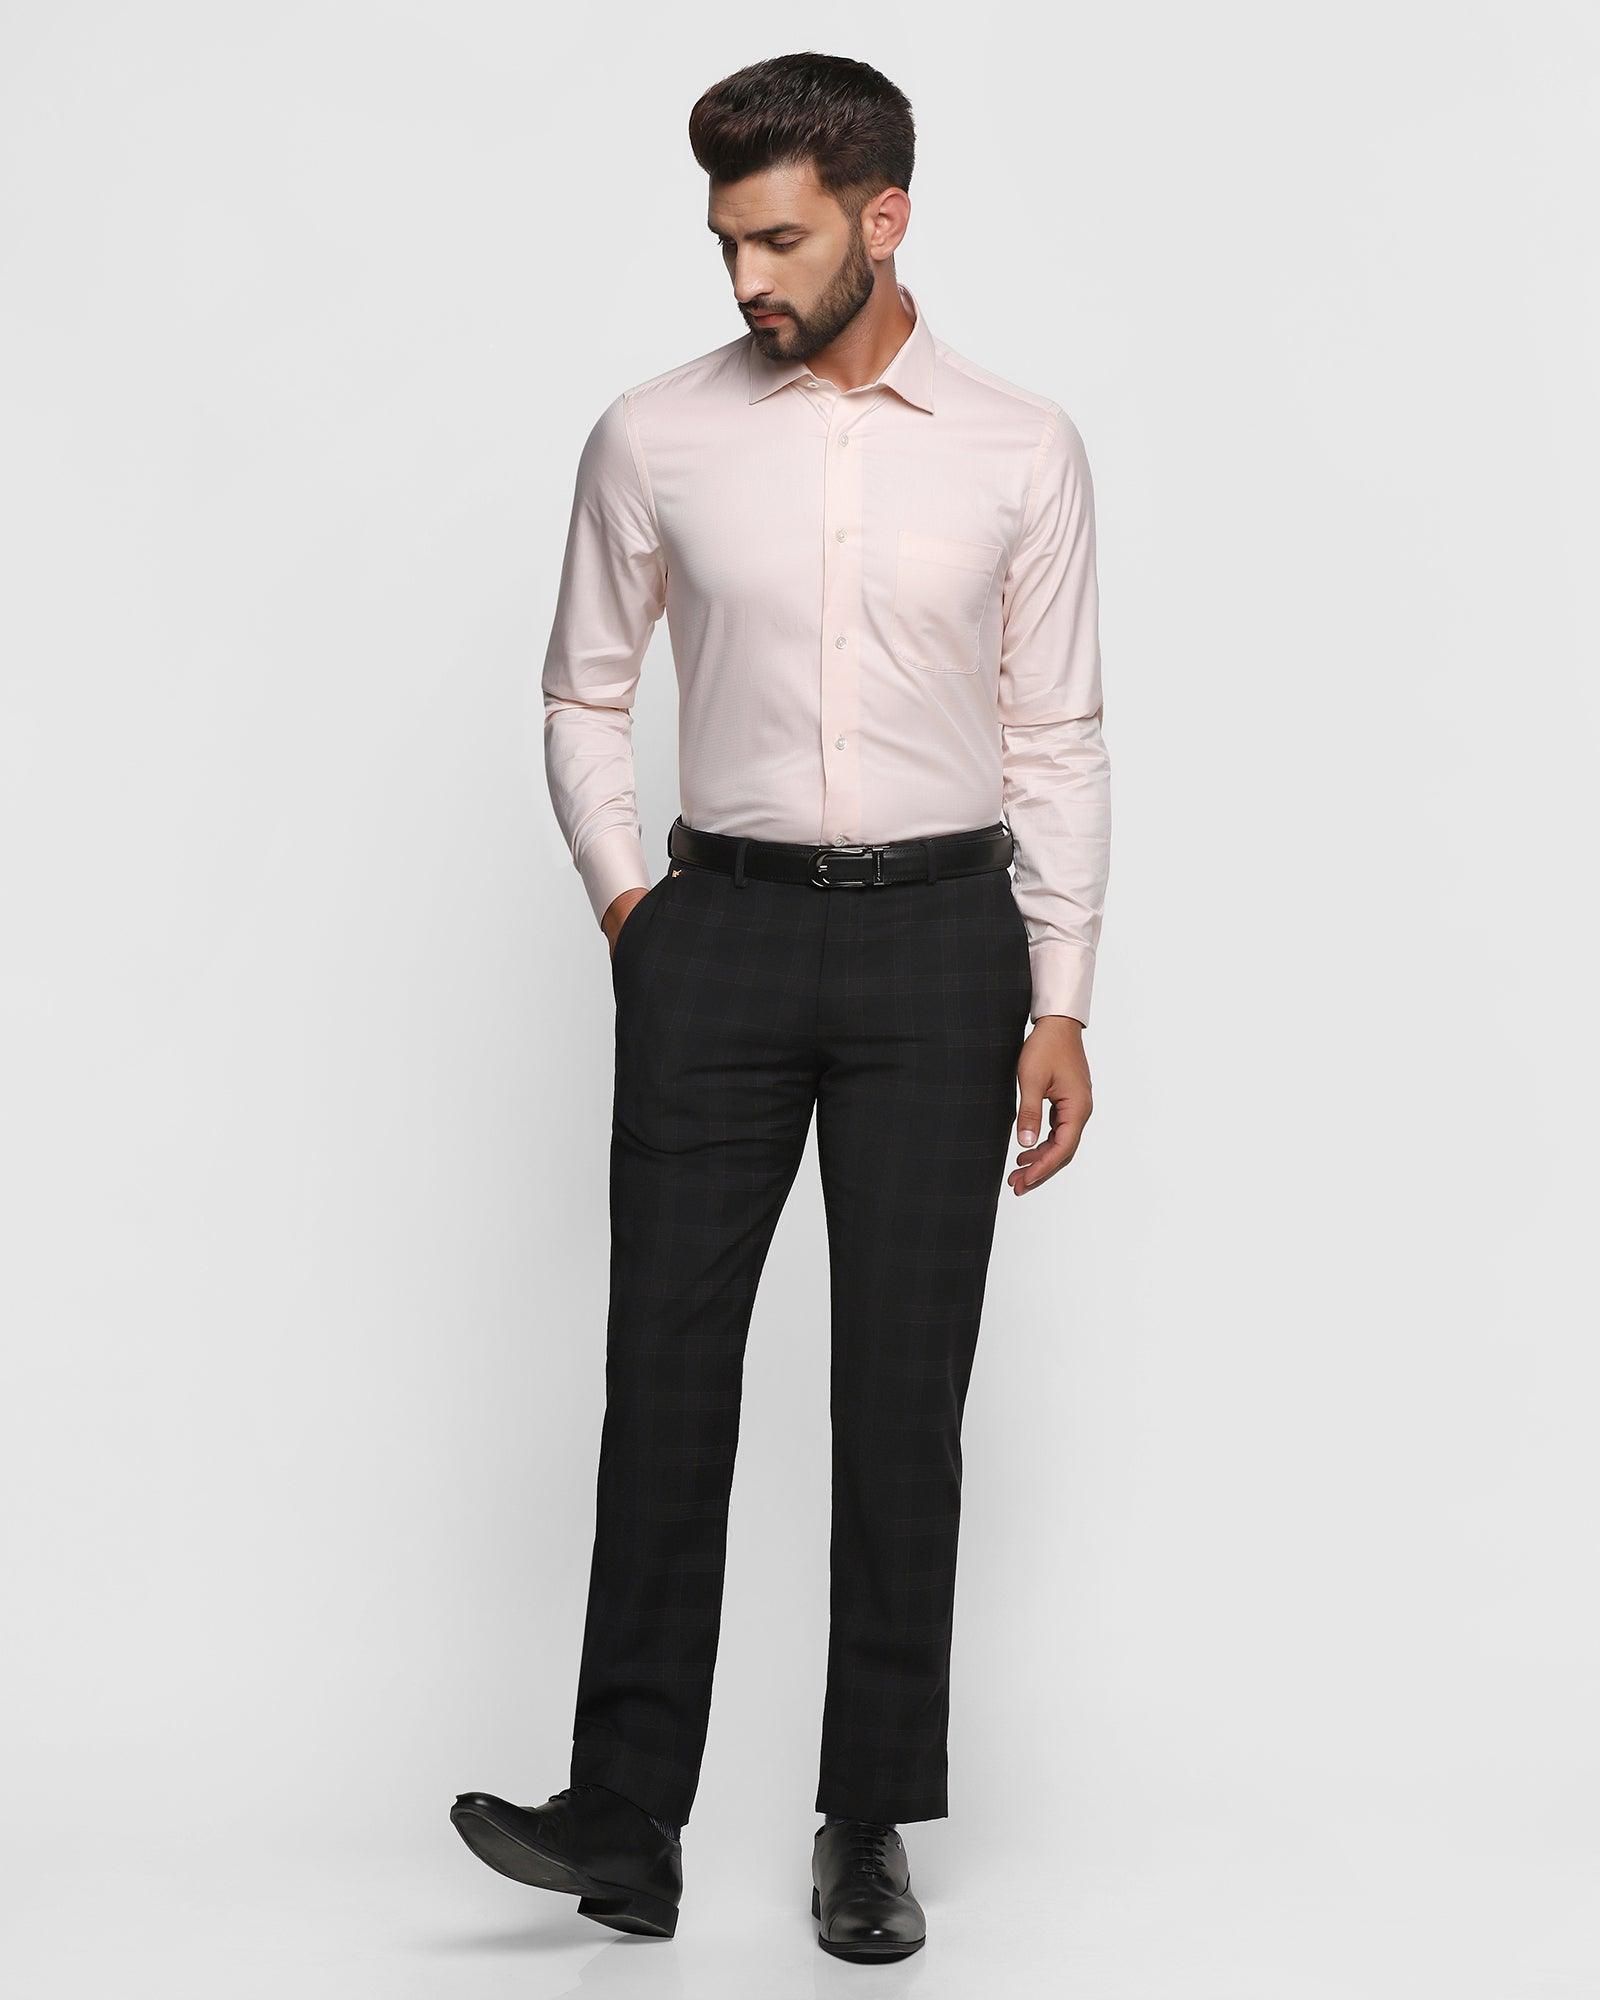 Luxe Formal Pink Solid Shirt - Wonder